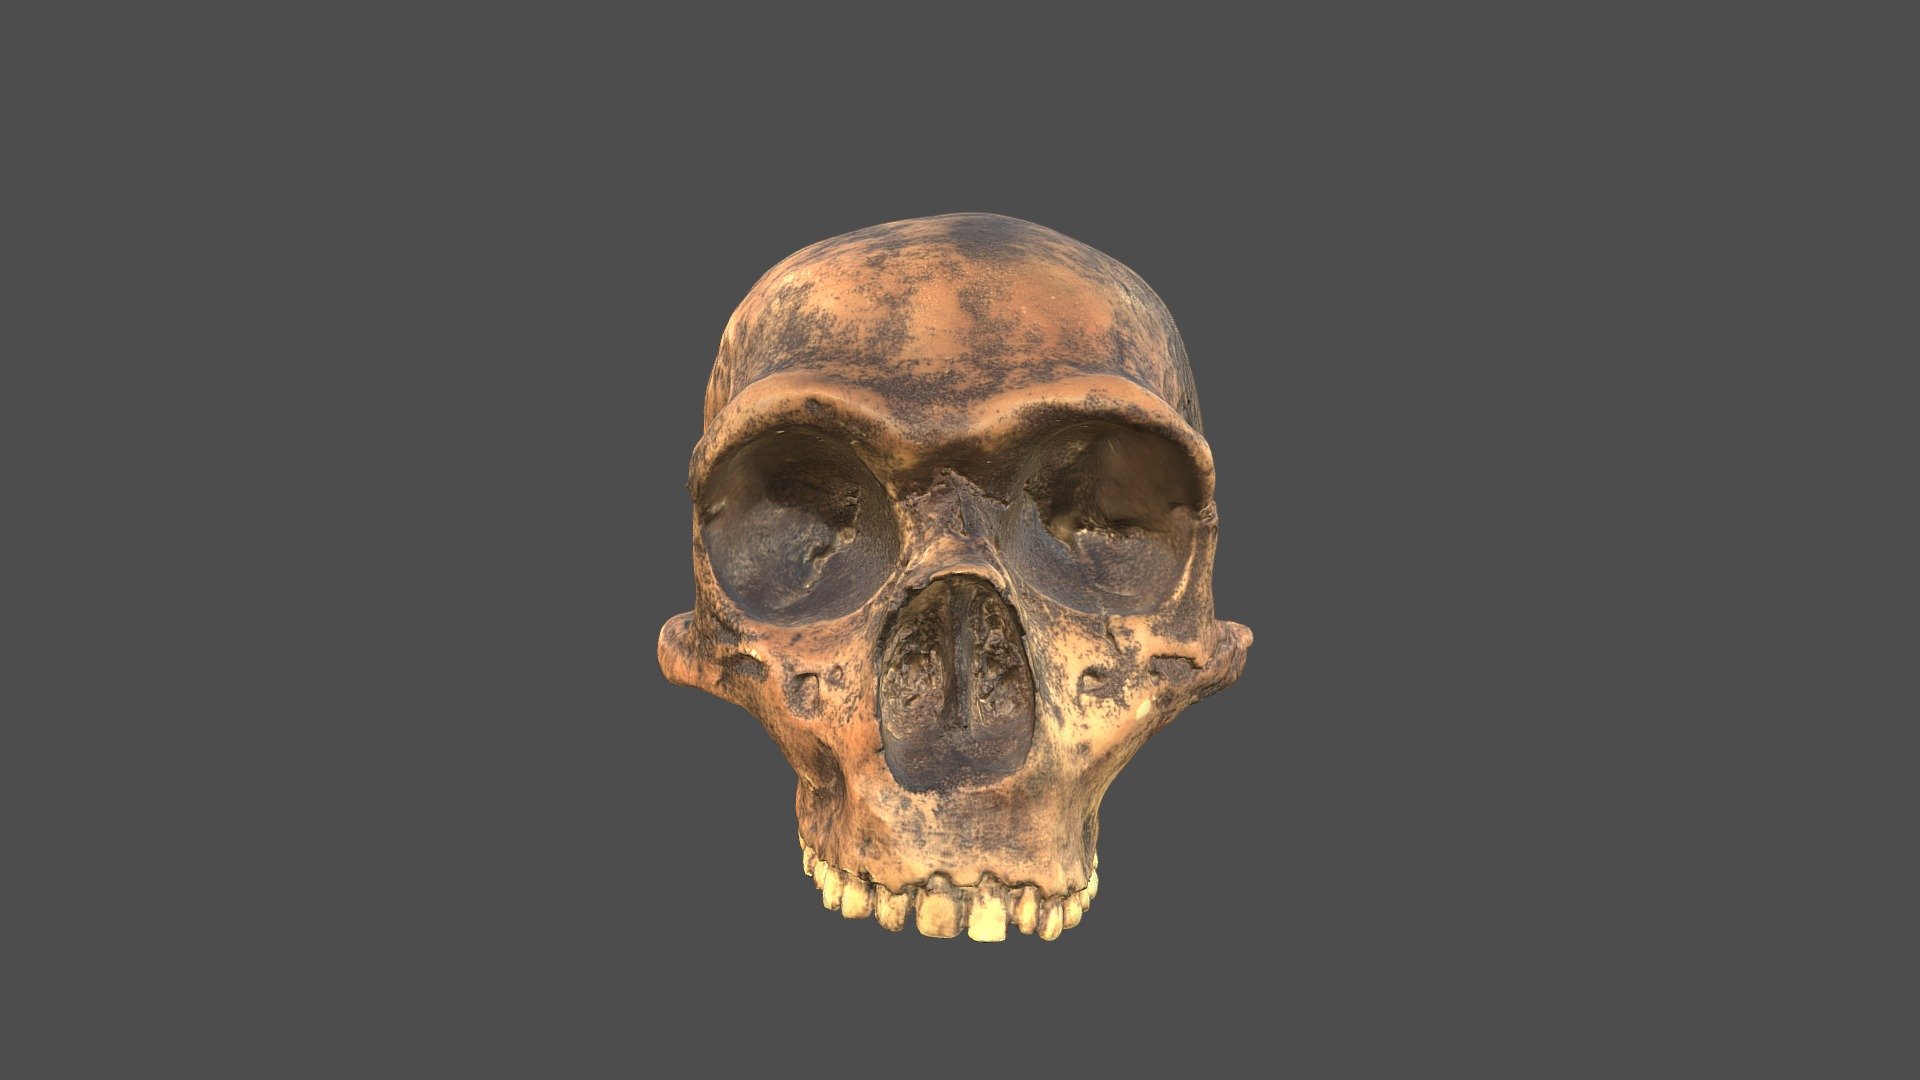 Gibraltar 1 Skull with Texture